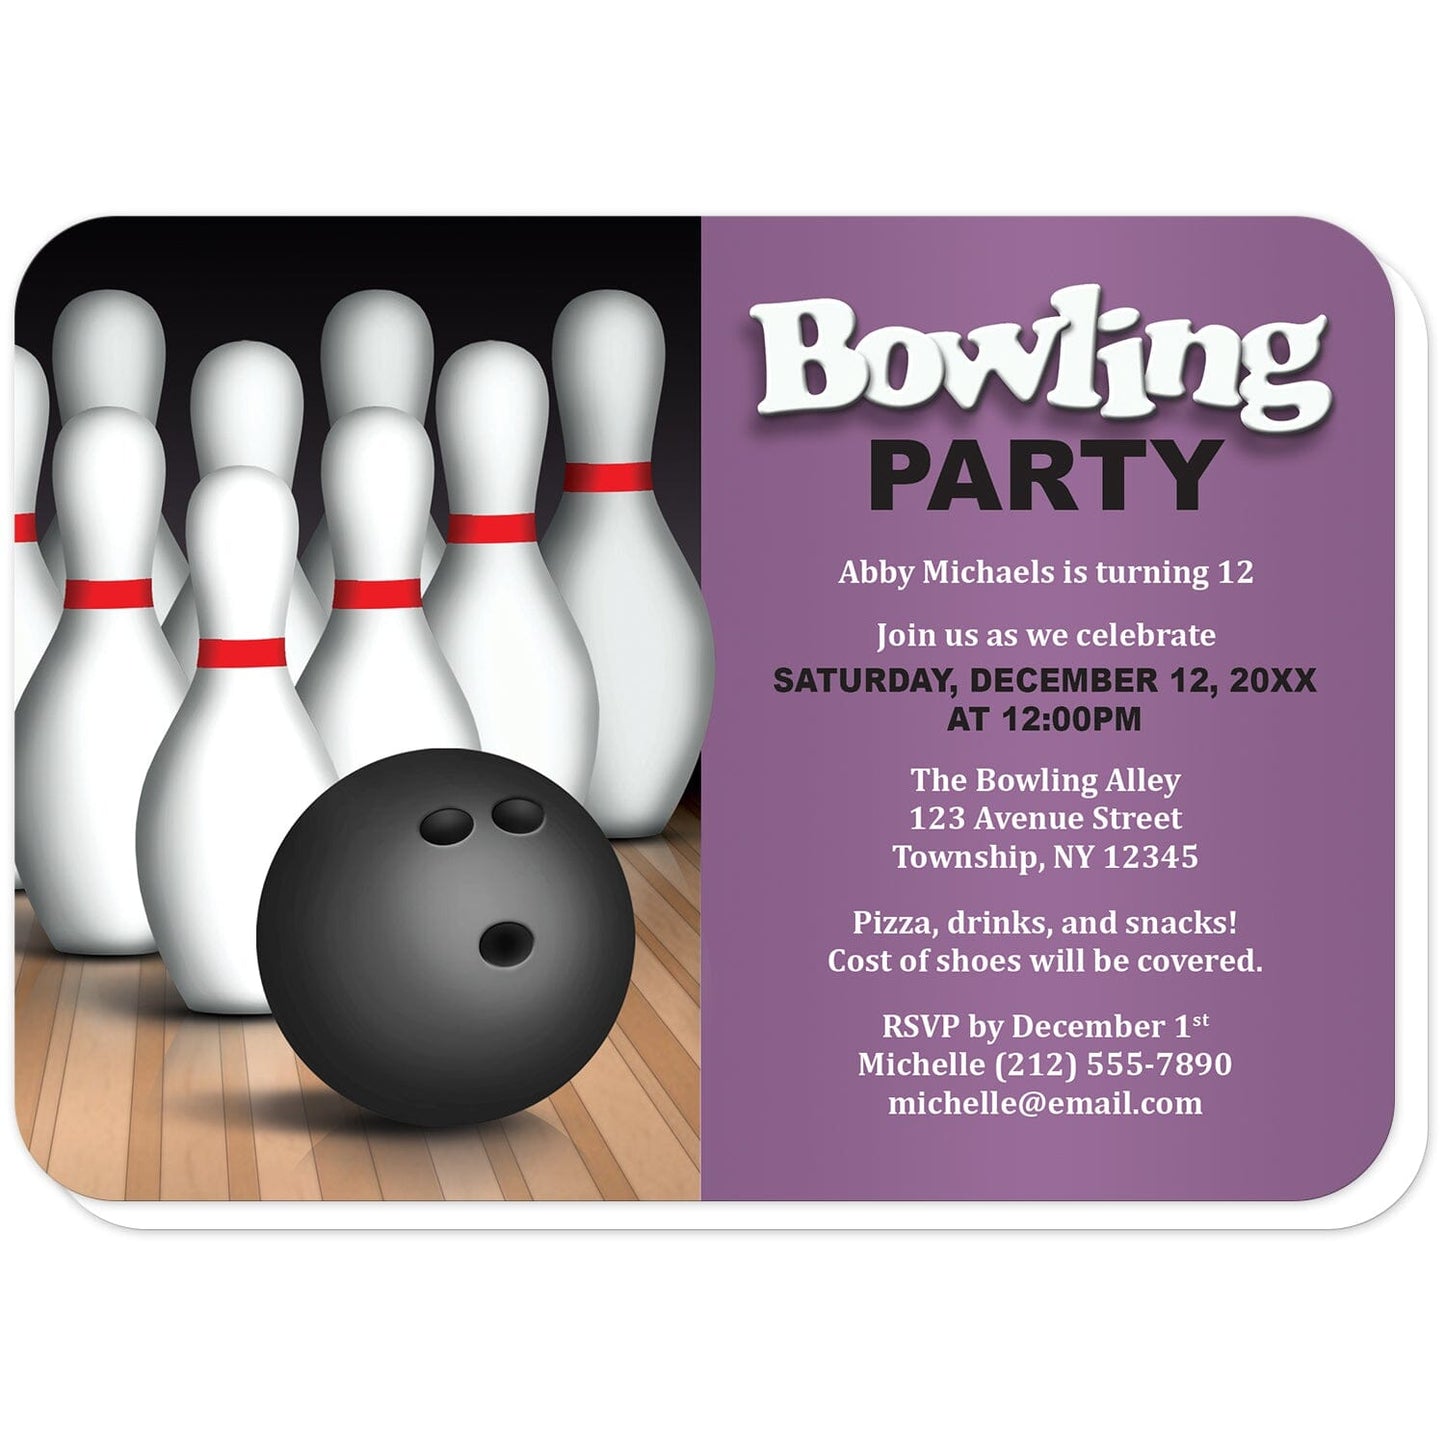 Bowling Ball and Pins Birthday Party Invitations in Purple (with rounded corners) at Artistically Invited. Bowling ball and pins birthday party invitations for any age or milestone that are uniquely illustrated with a bowling ball and bowling pins at the bowling alley. Your personalized birthday party details are custom printed in black and white over a colored background to the right of the illustration. 